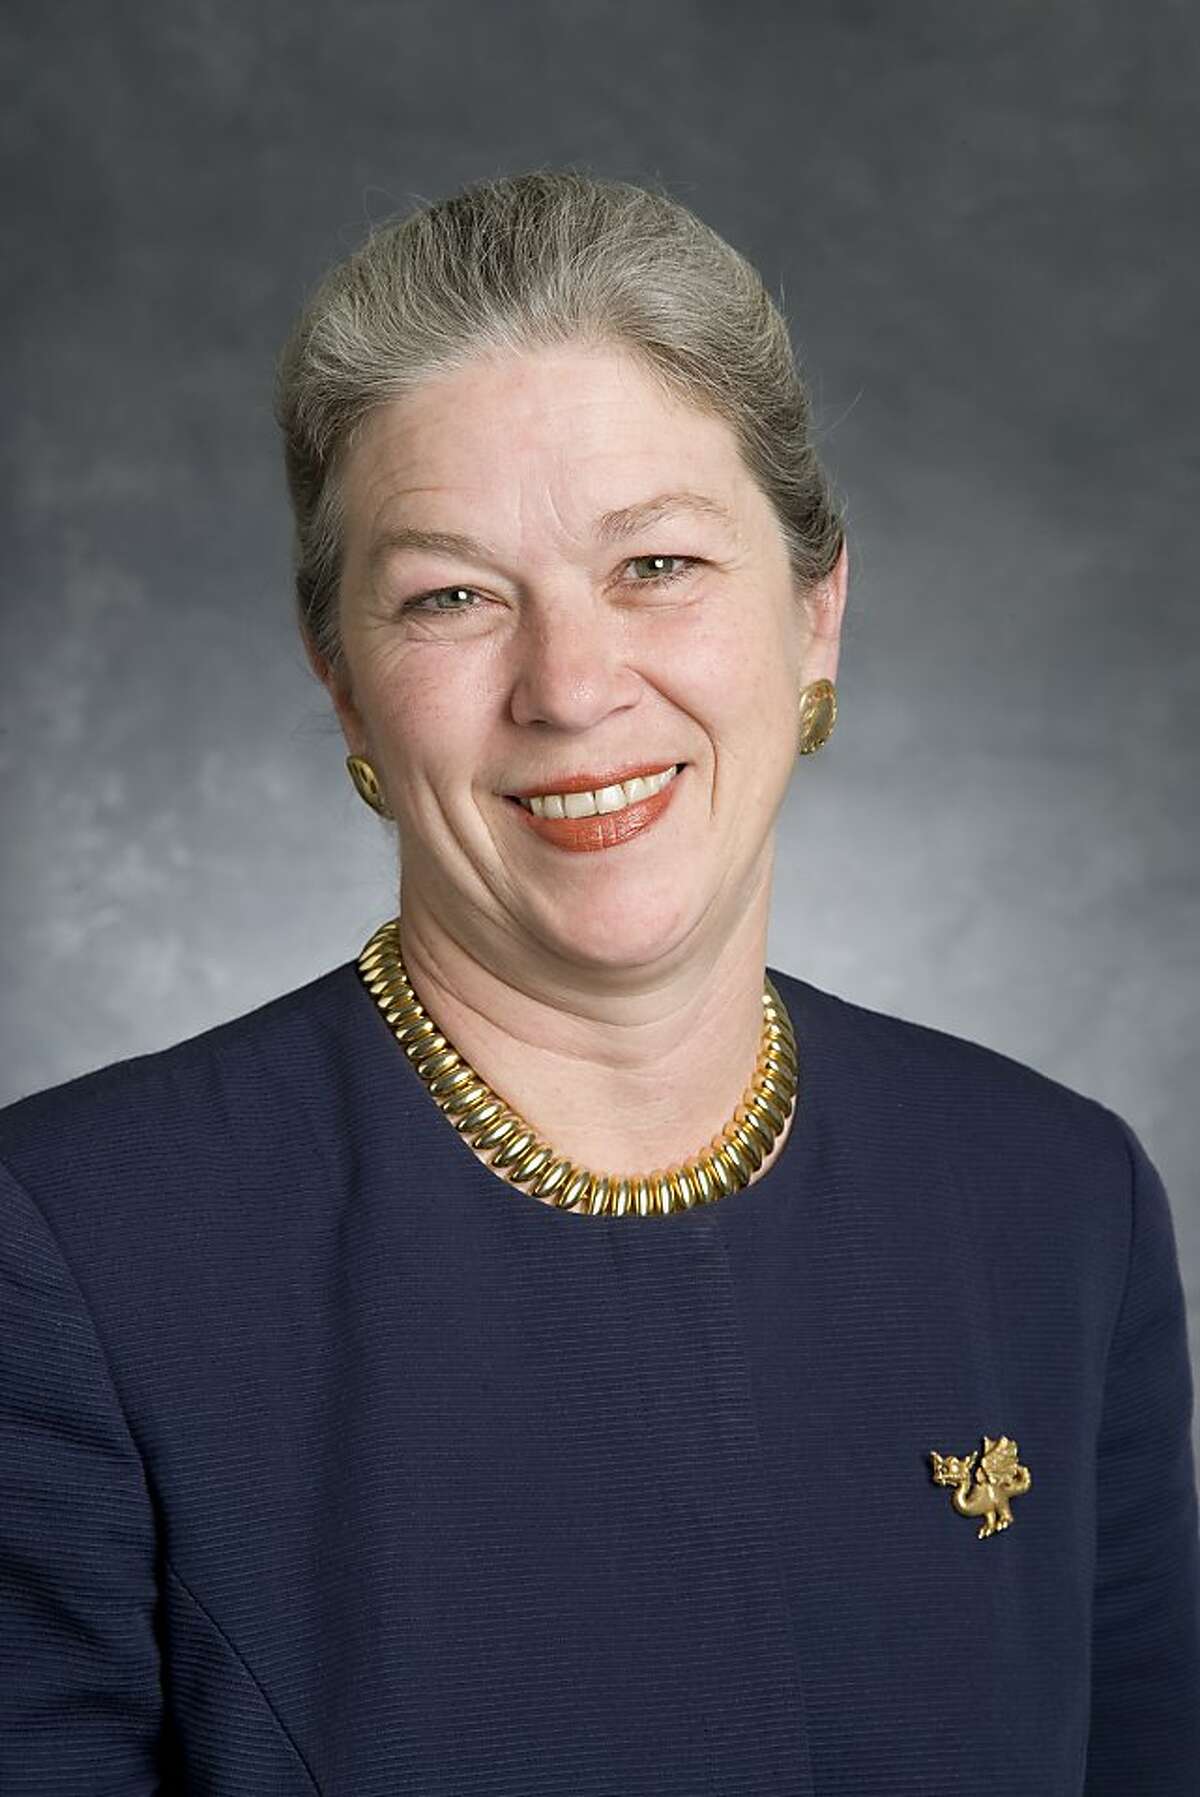 This is a picture of Dorothy Dugger. BART general manager.